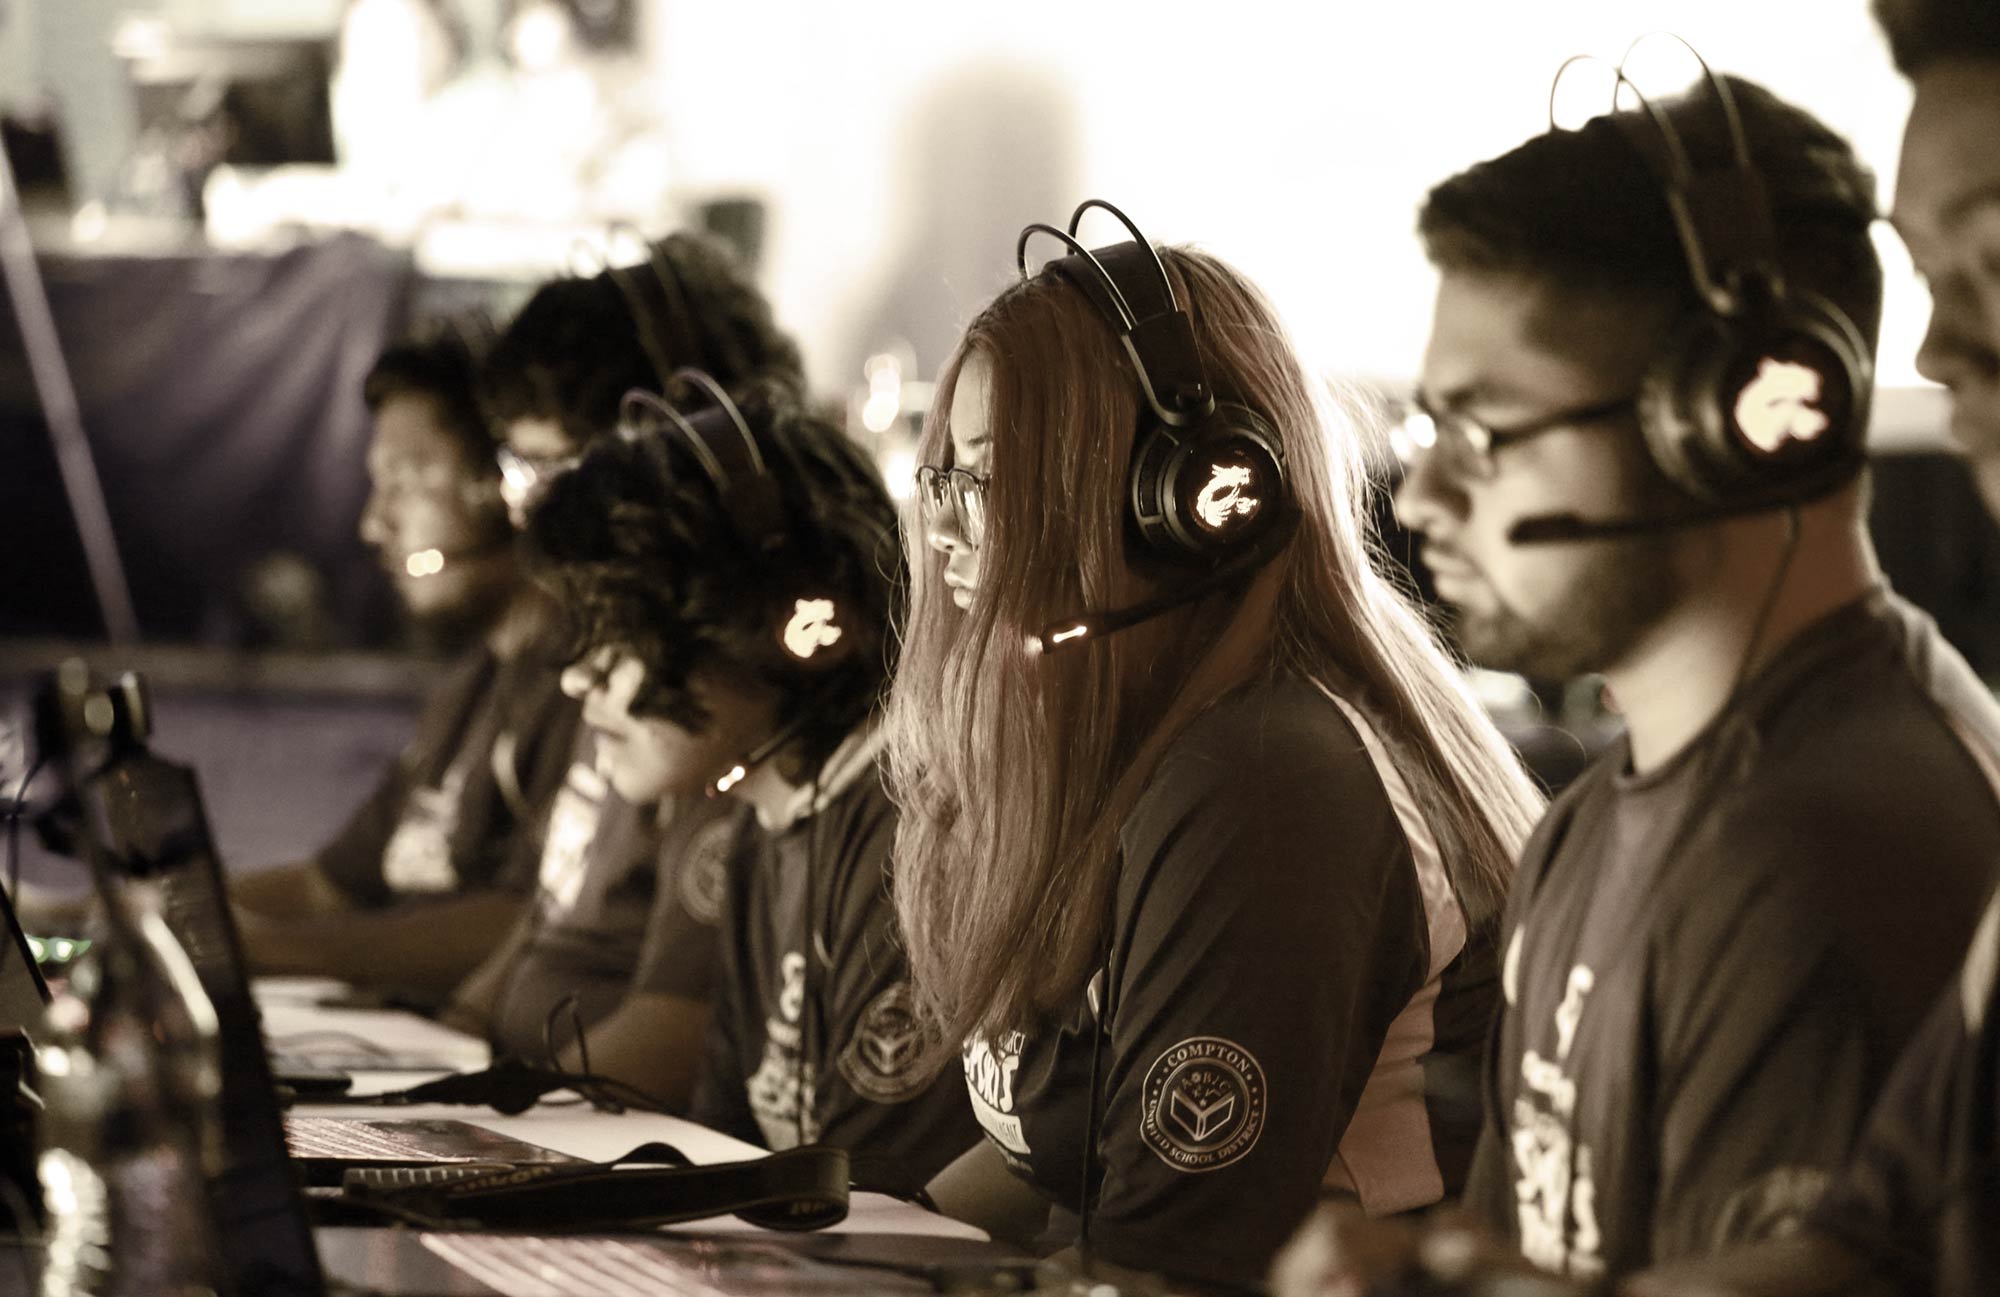 Close-up landscape photograph perspective of the Compton Unified Esports League (CUEL) participants in their gaming shirts and gaming headsets